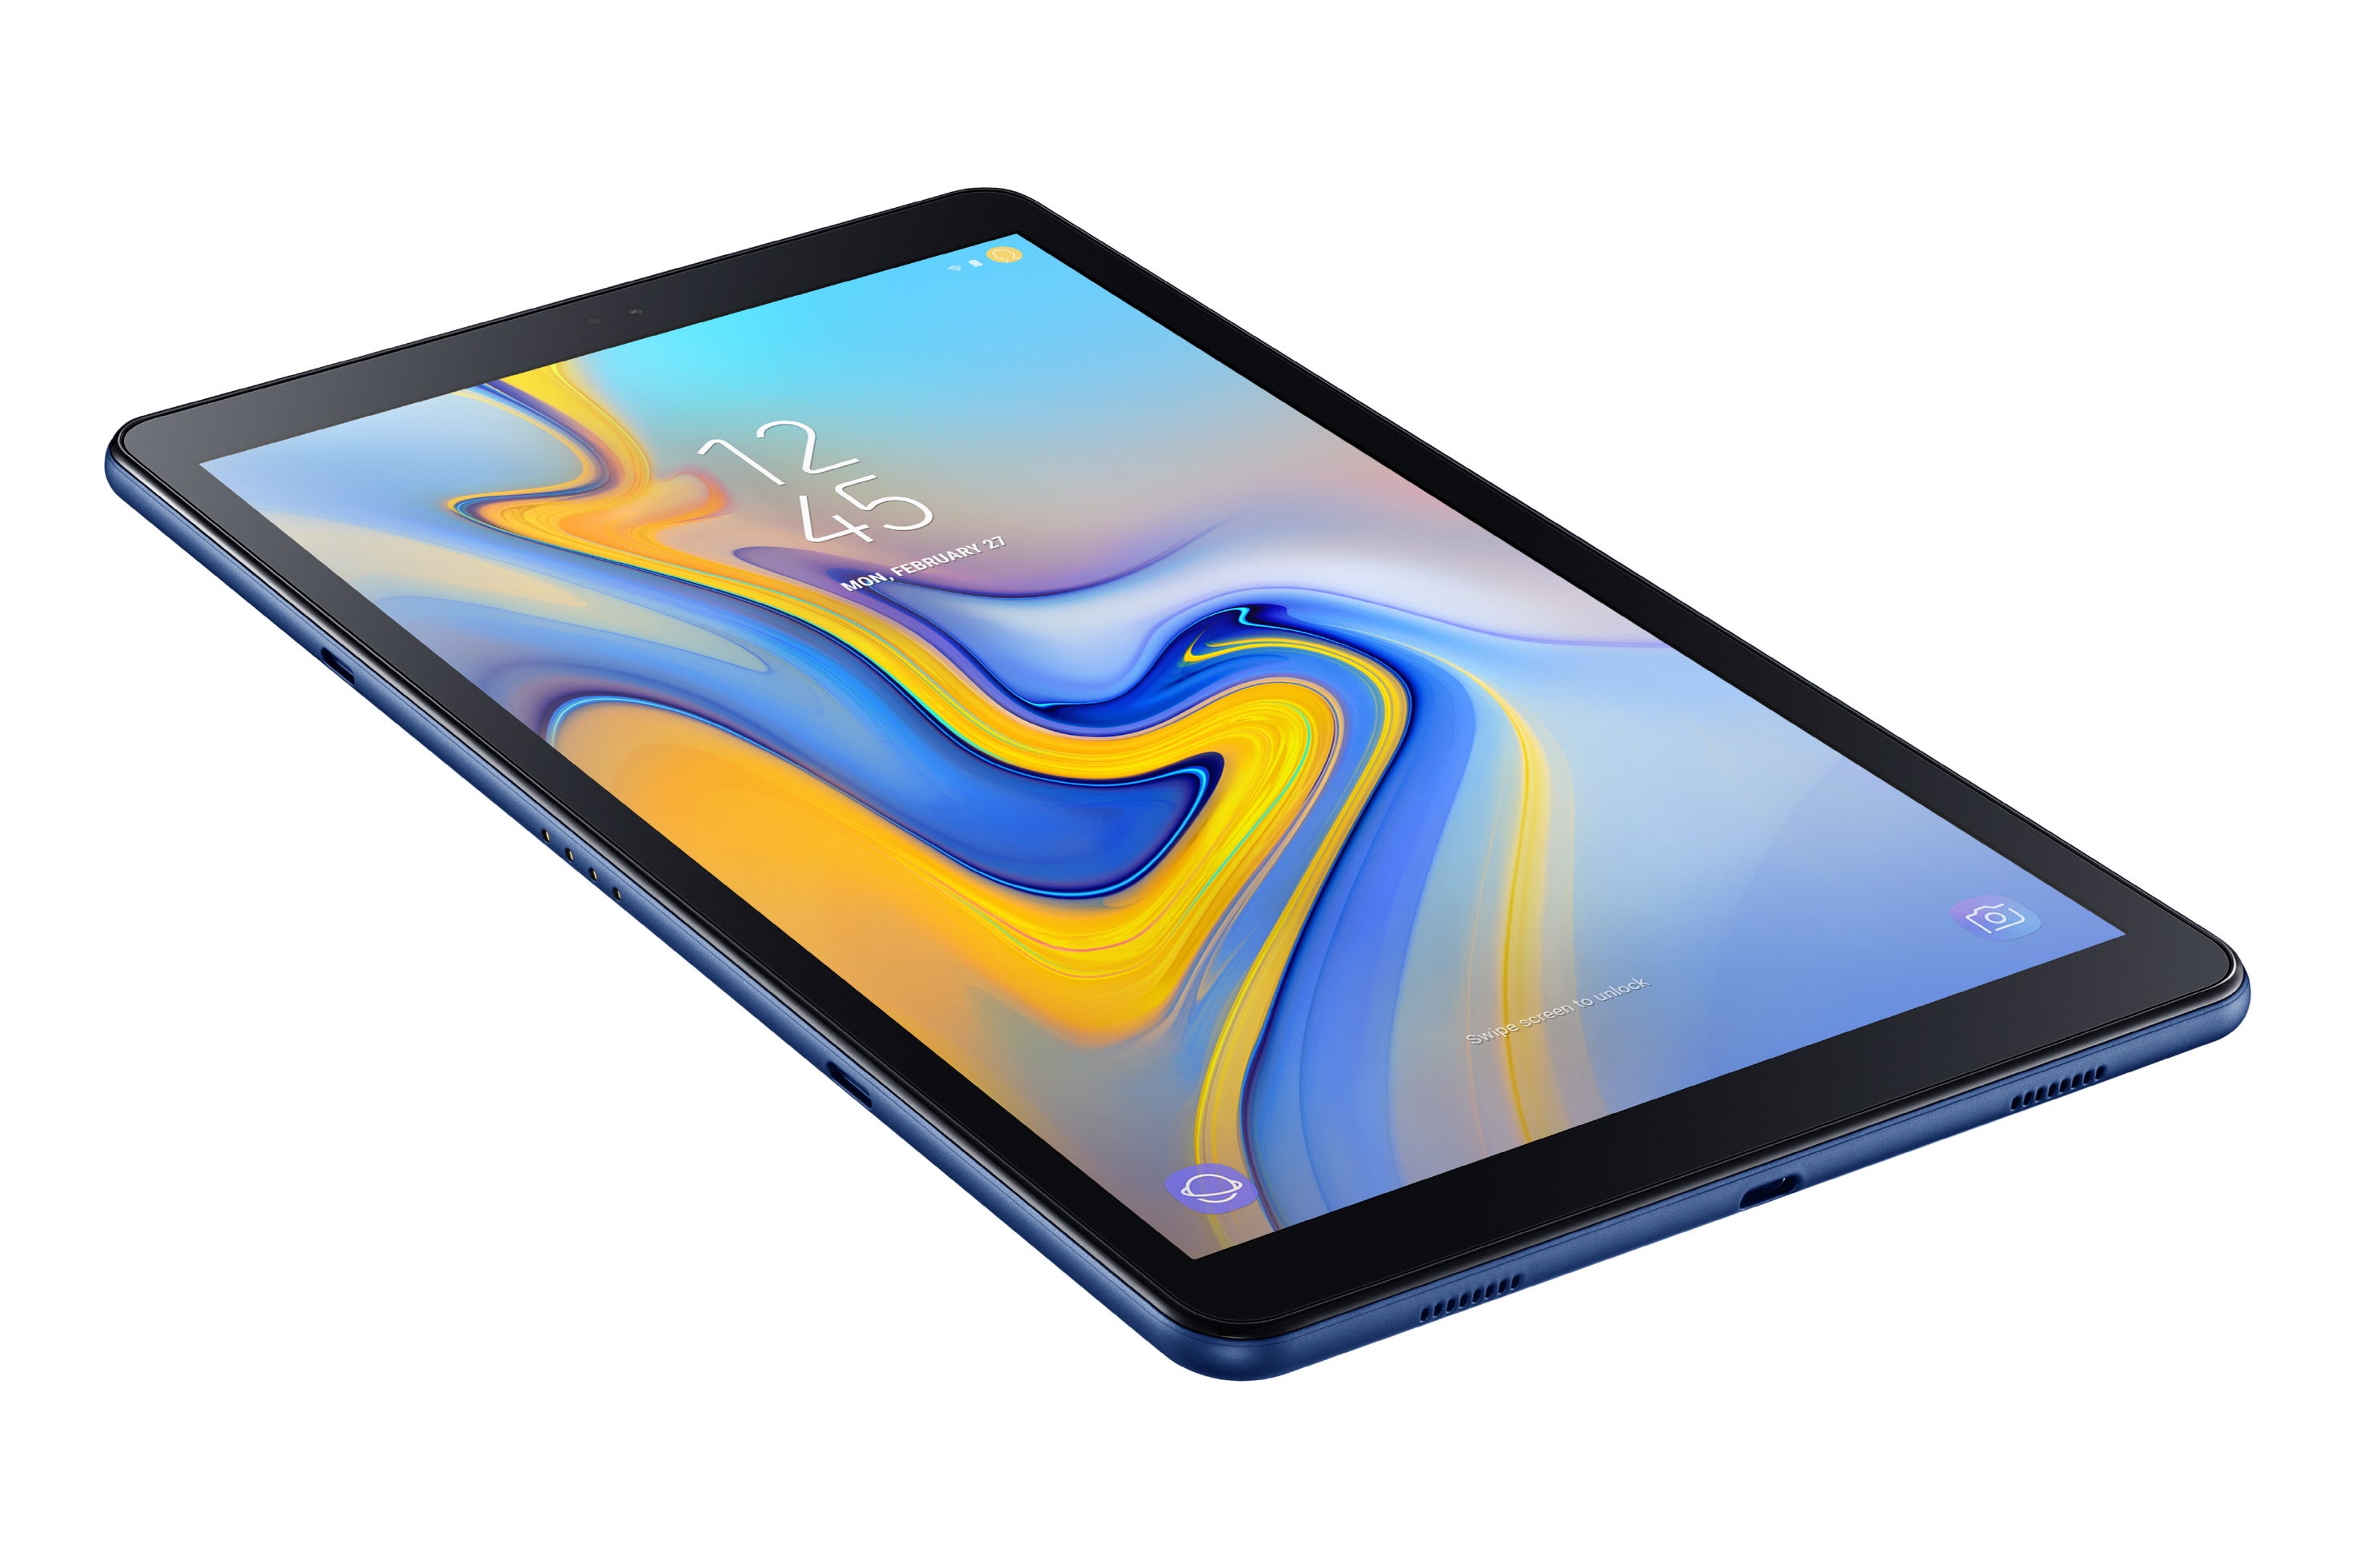 Galaxy Tab A 10.5 is official: Specs and features